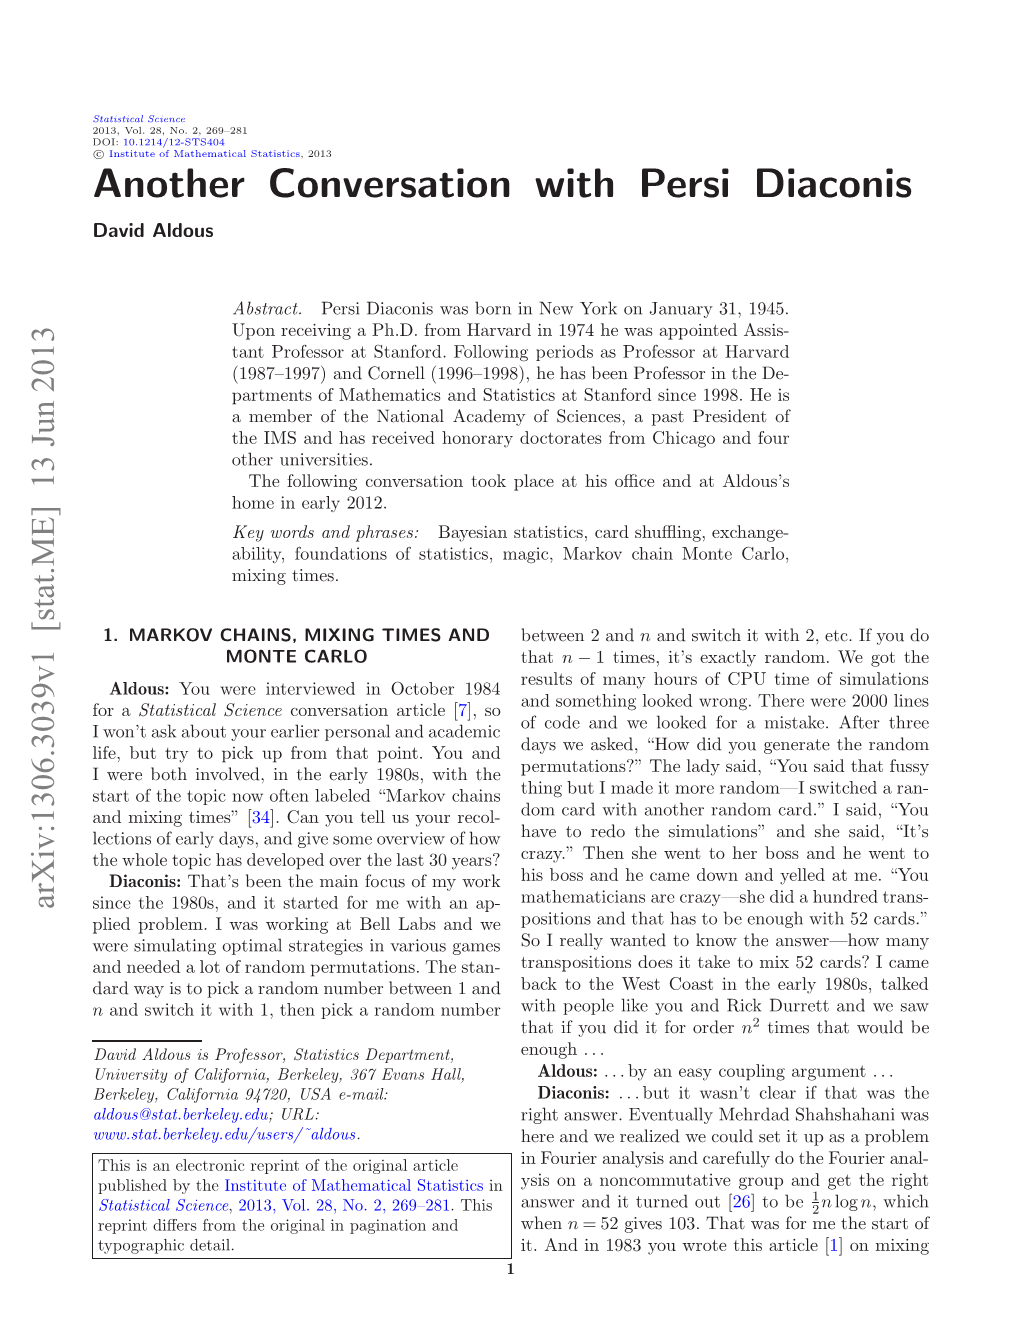 ANOTHER CONVERSATION with PERSI DIACONIS 3 Technical (Rather Than Philosophical) Issues in Bayes- Like De Finetti’S Theorem, Which I Was Interested in Ian Statistics